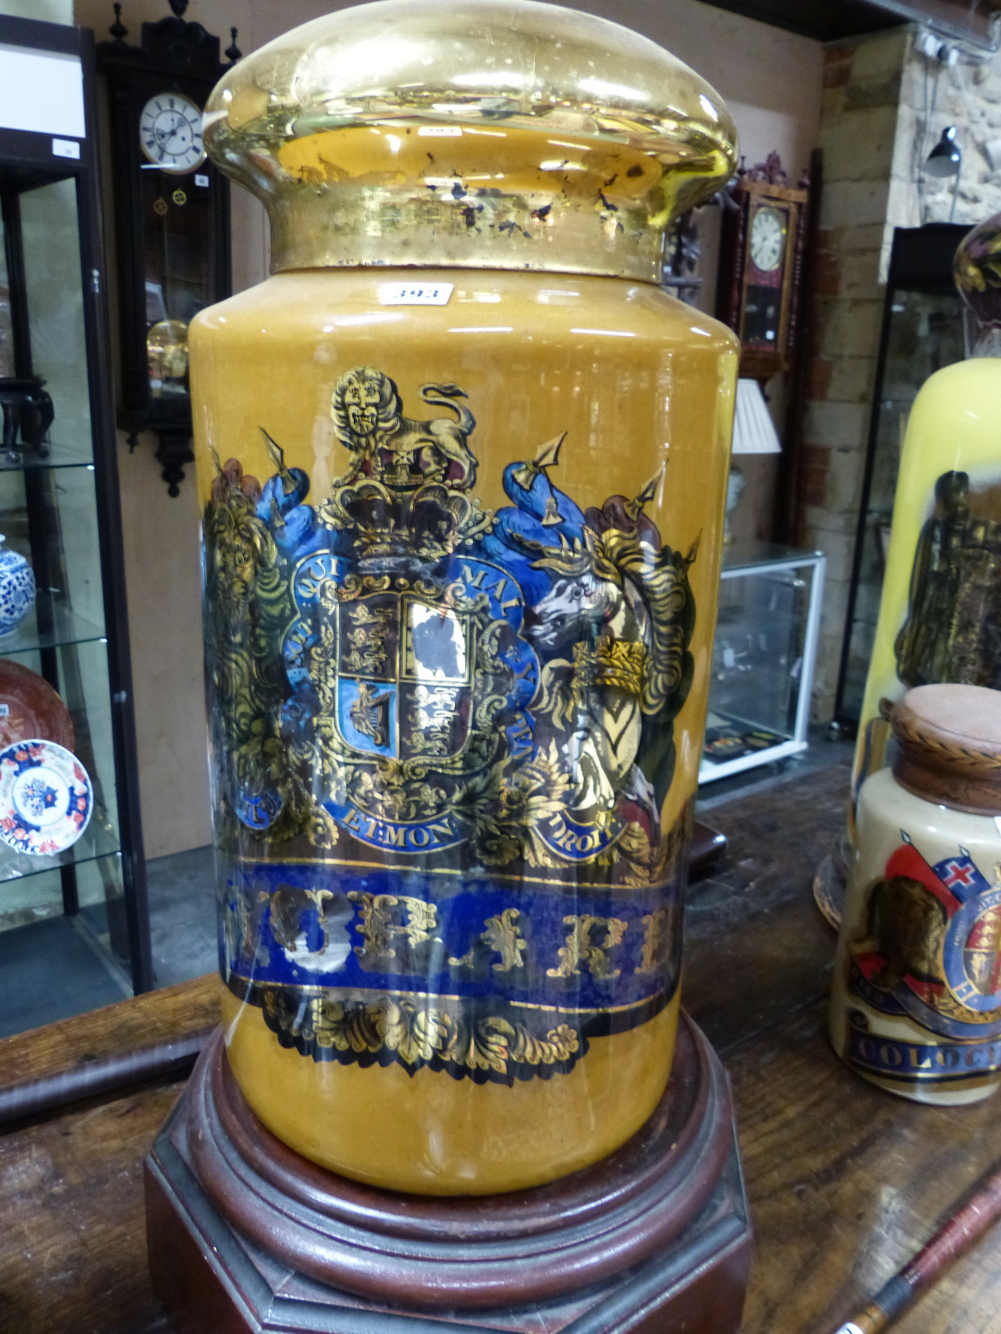 A LARGE VICTORIAN GILT AND POLYCHROME DECORATED GLASS APOTHECARY JAR WITH COVER, ORDER OF THE GARTER